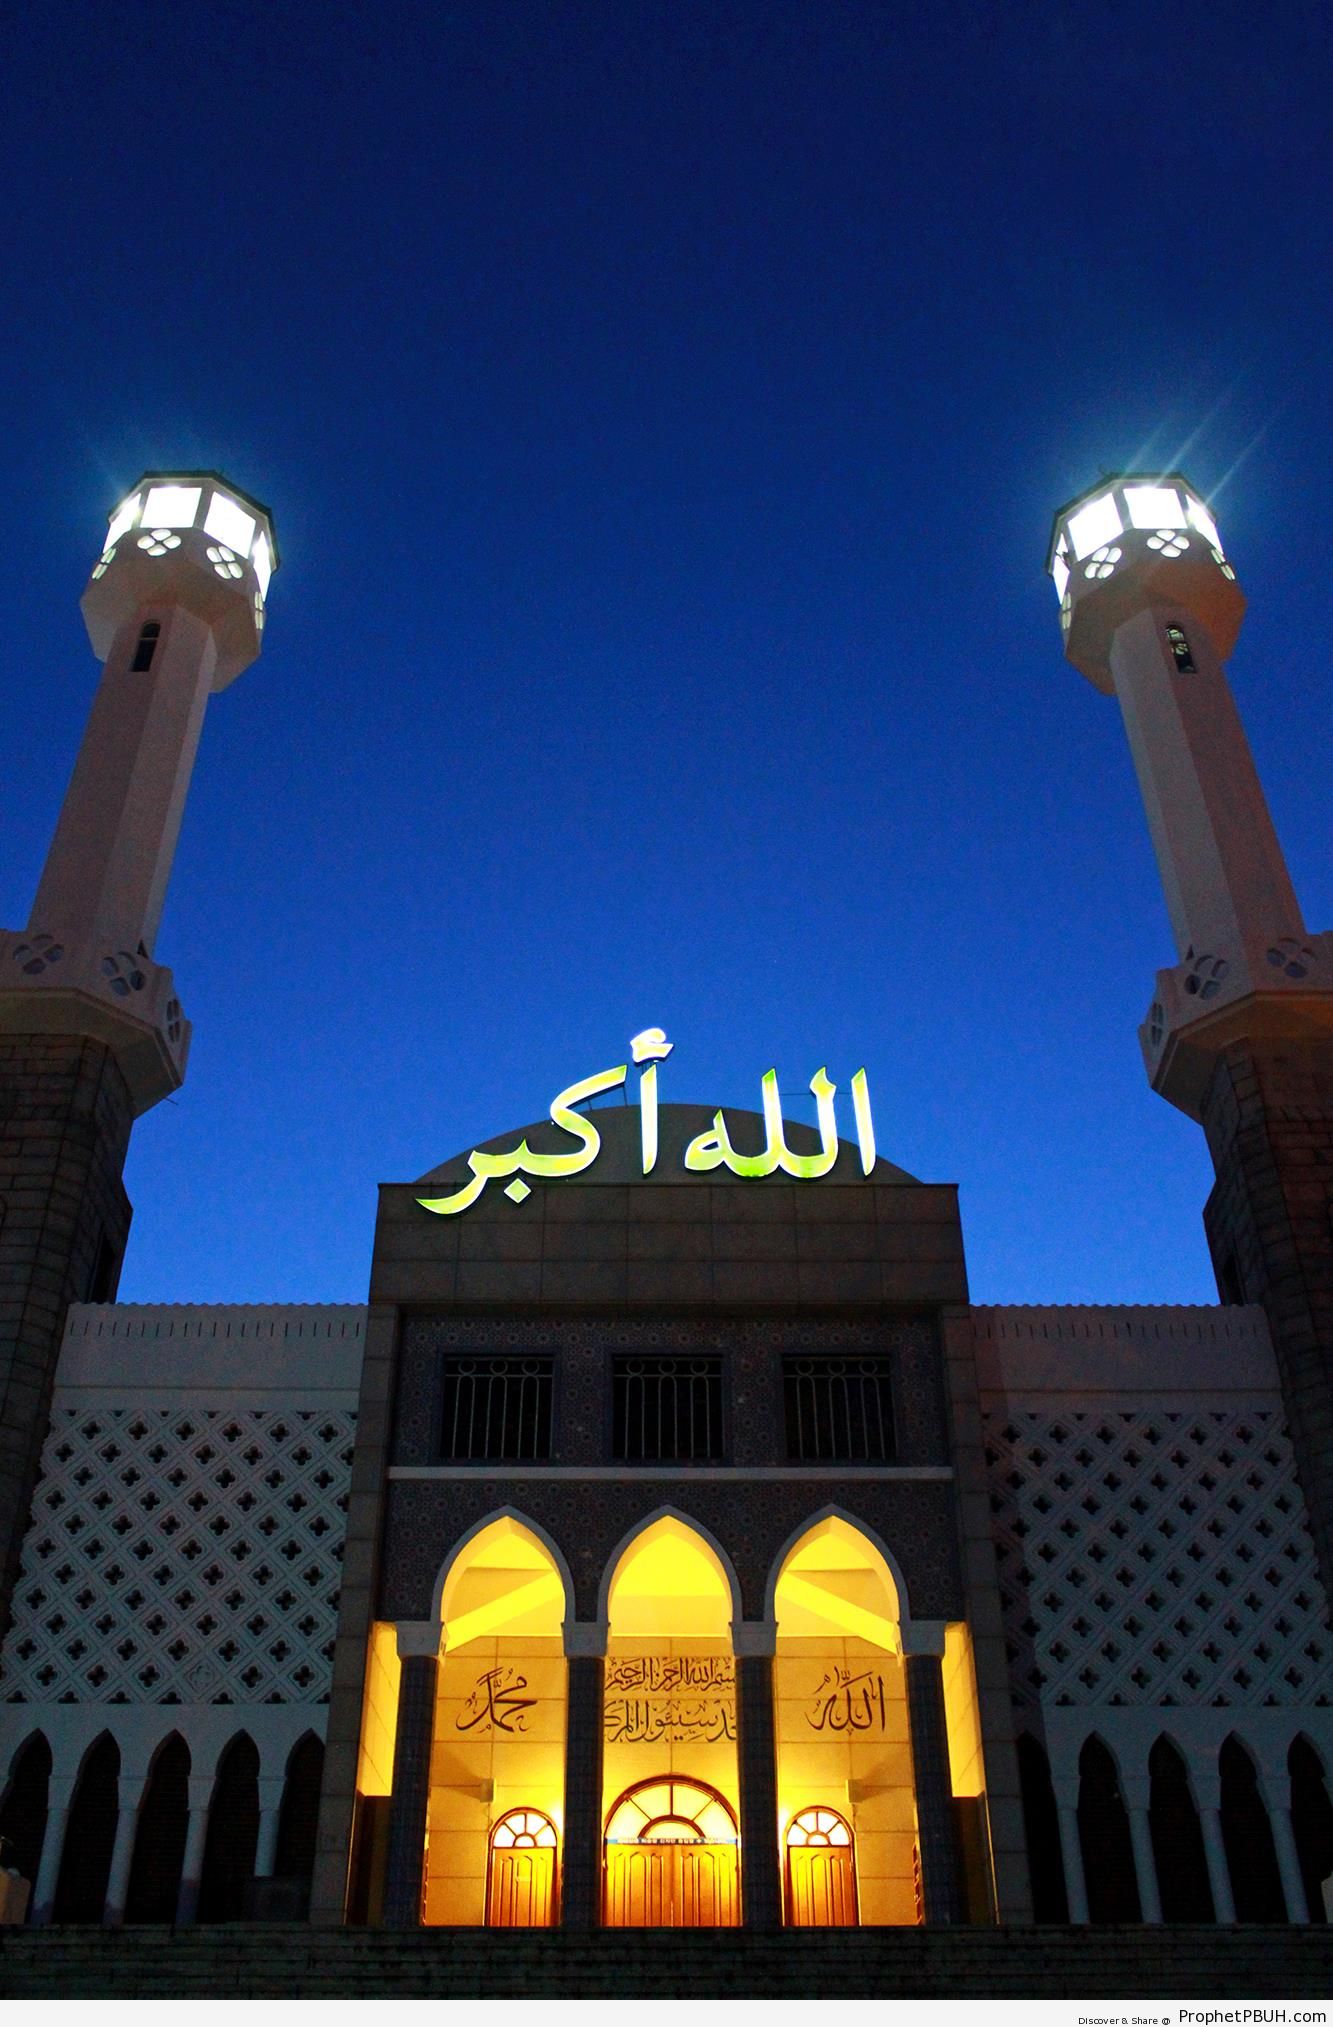 Lit Up Allahu Akbar Calligraphy at Seoul Central Mosque in Seoul, South Korea - Allahu Akbar Calligraphy and Typography 